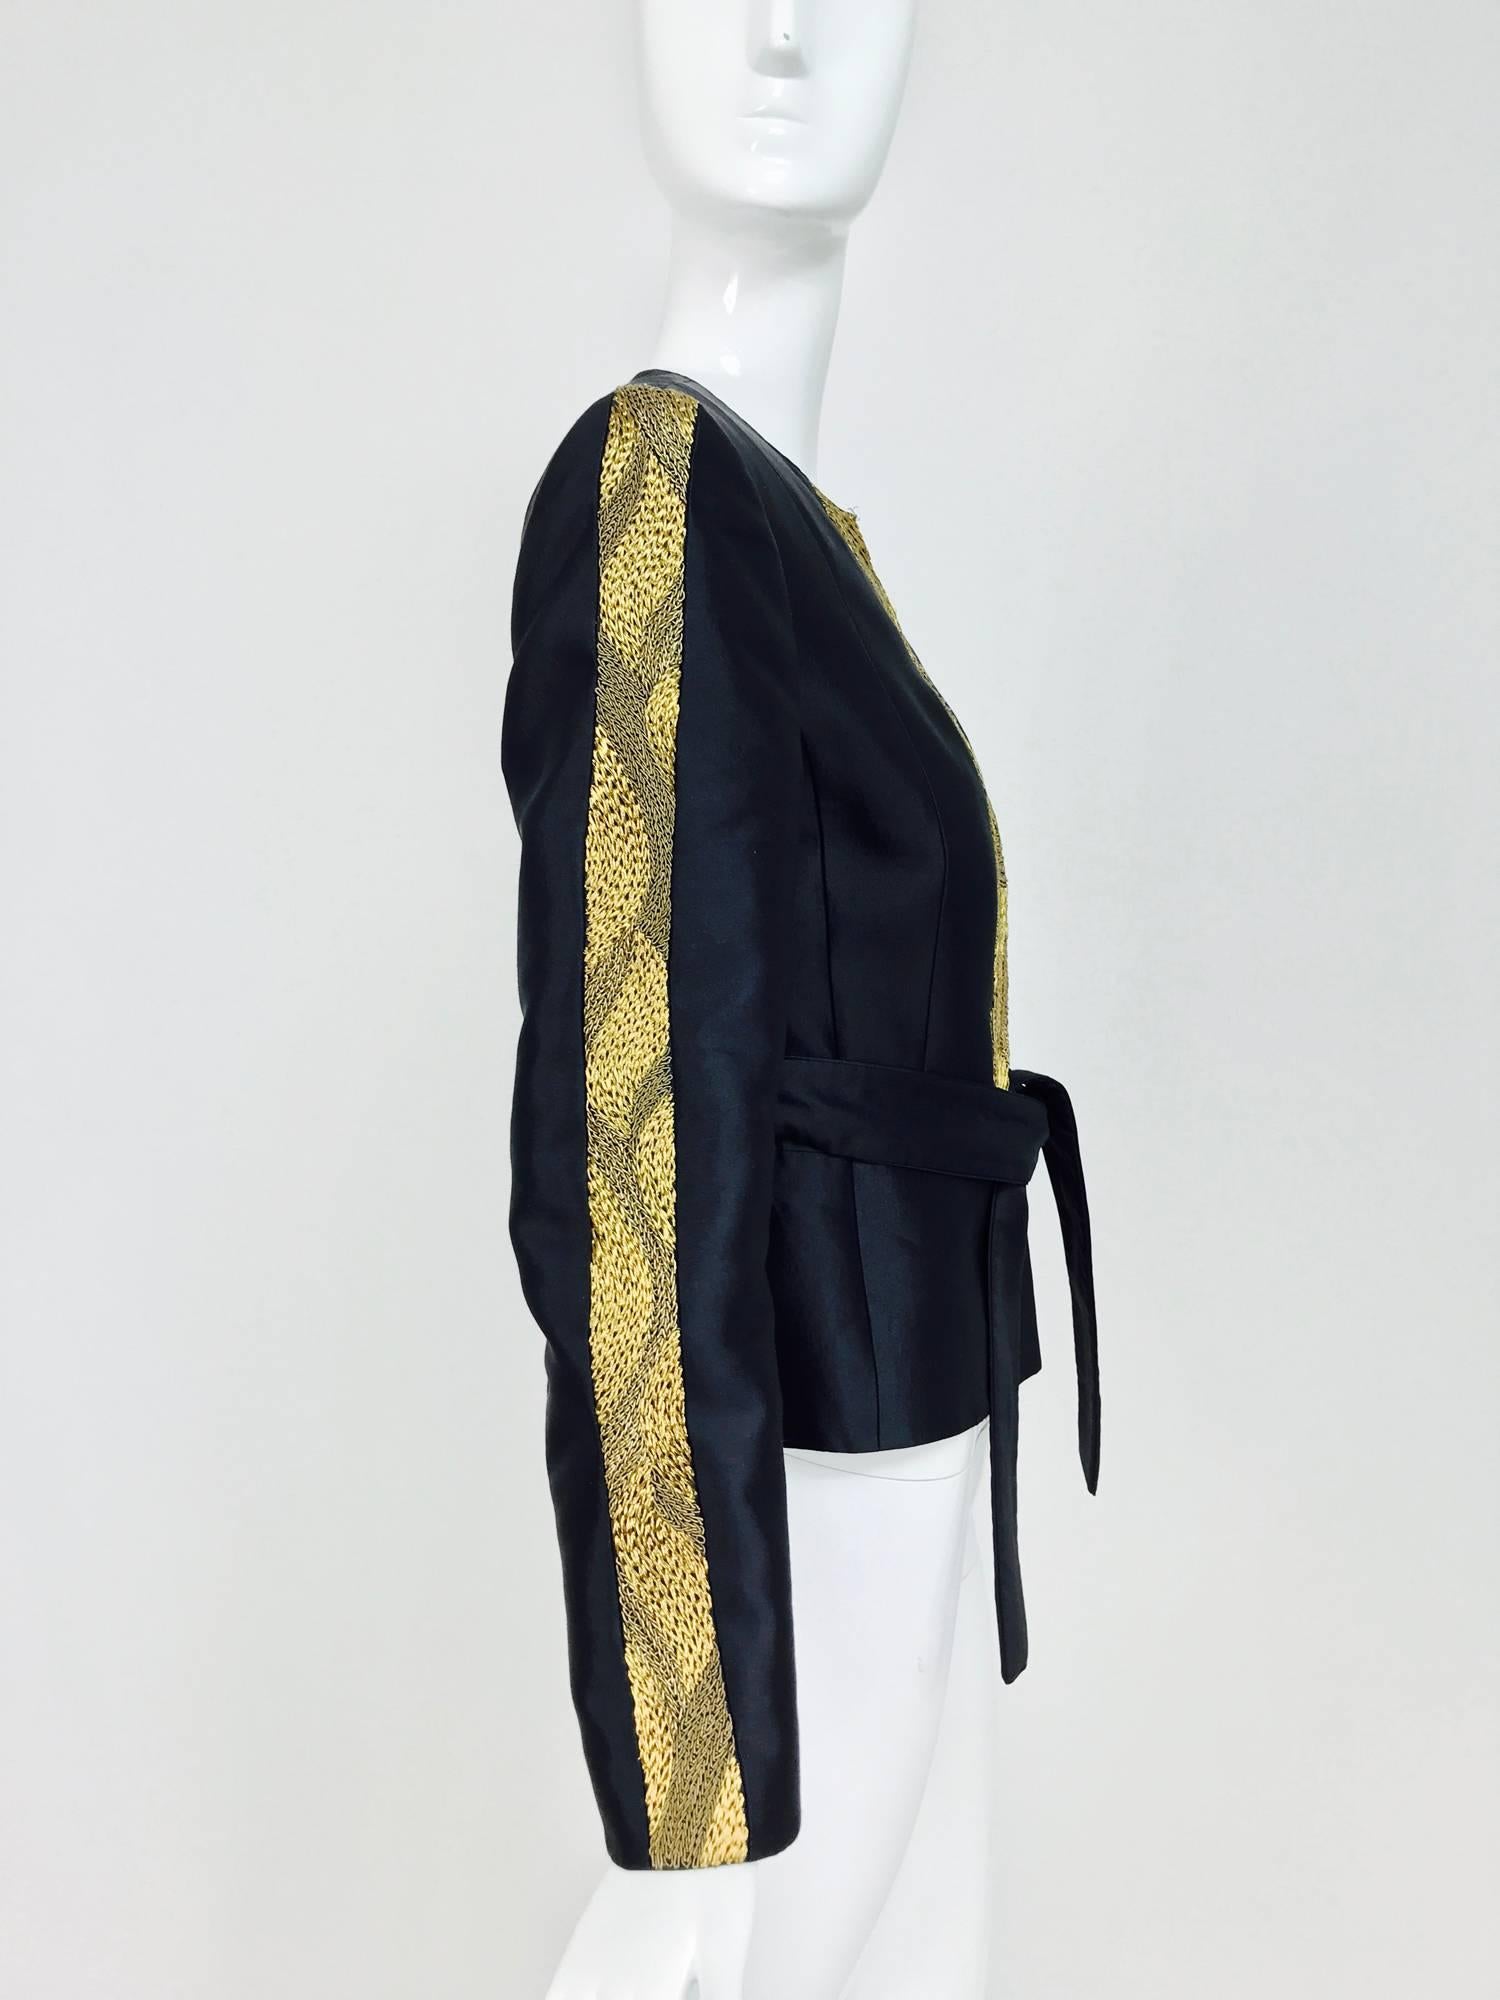 Black Rena Lange black wool and silk jacket with heavy gold cord embroidery 